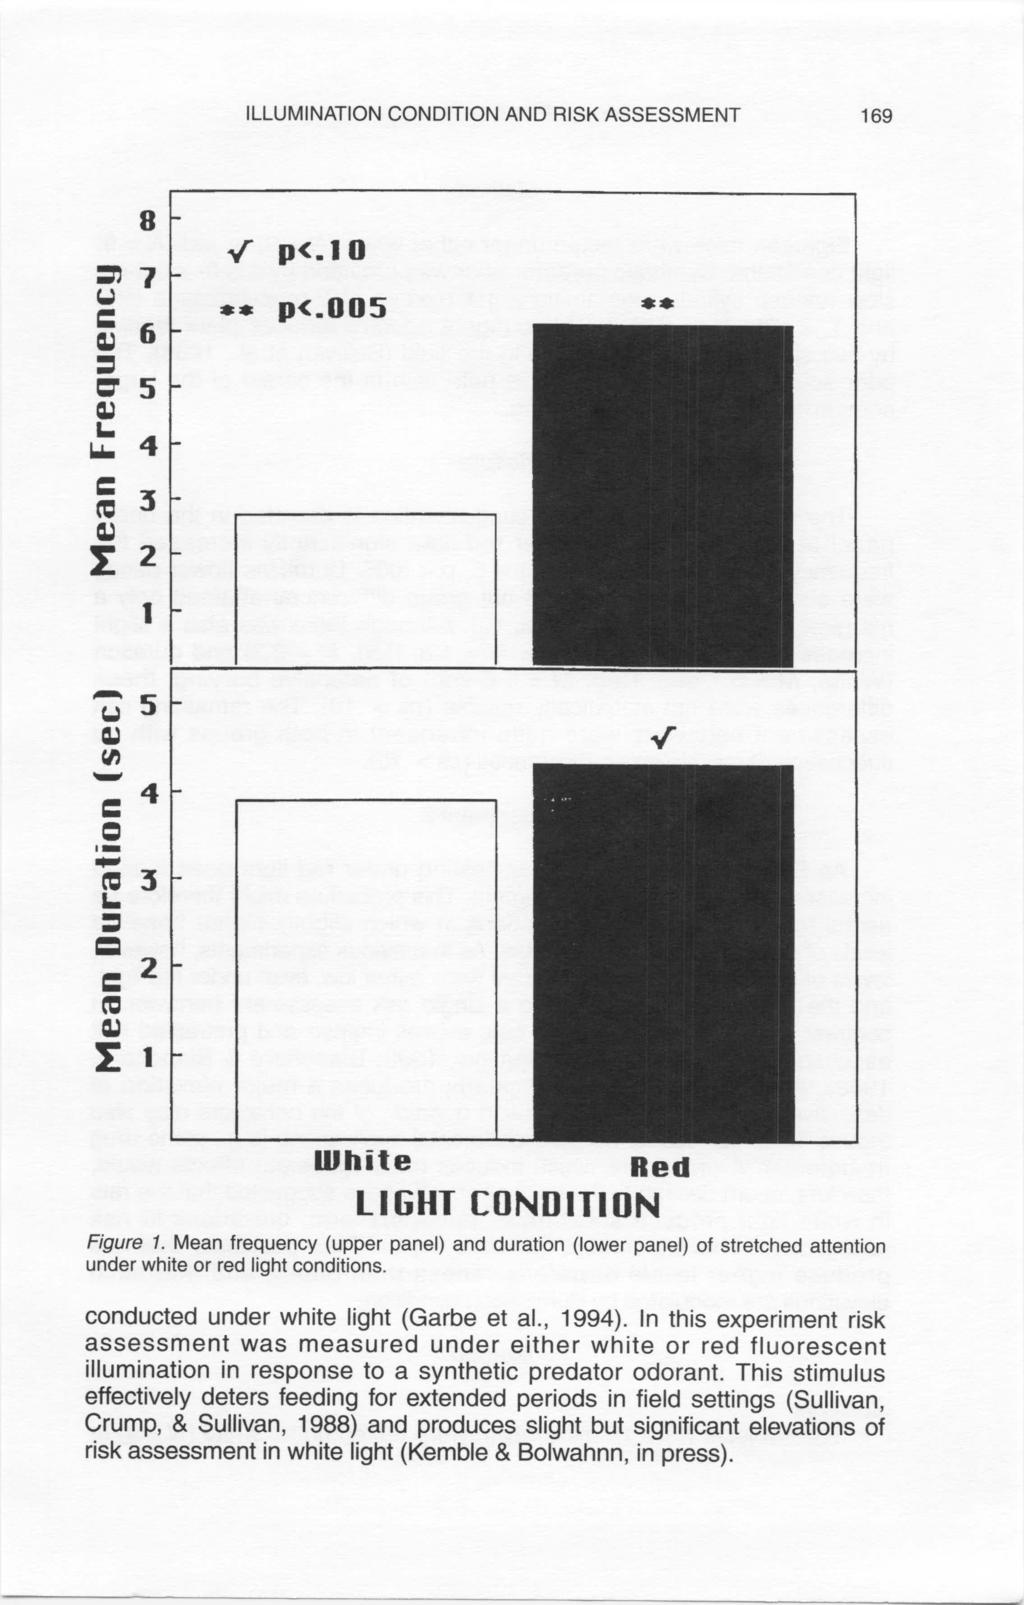 ILLUMINATION CONDITION AND RISK ASSESSMENT 169 8 7 (.) 6-5 L. w. 4 (C 3 I: 2 1 p<.10 p<.oo5 (.) '" "-' 5 4.-.., (C 3 L. 2 (C I: 1 White Red LIGHT [ONDITION Figure 1.